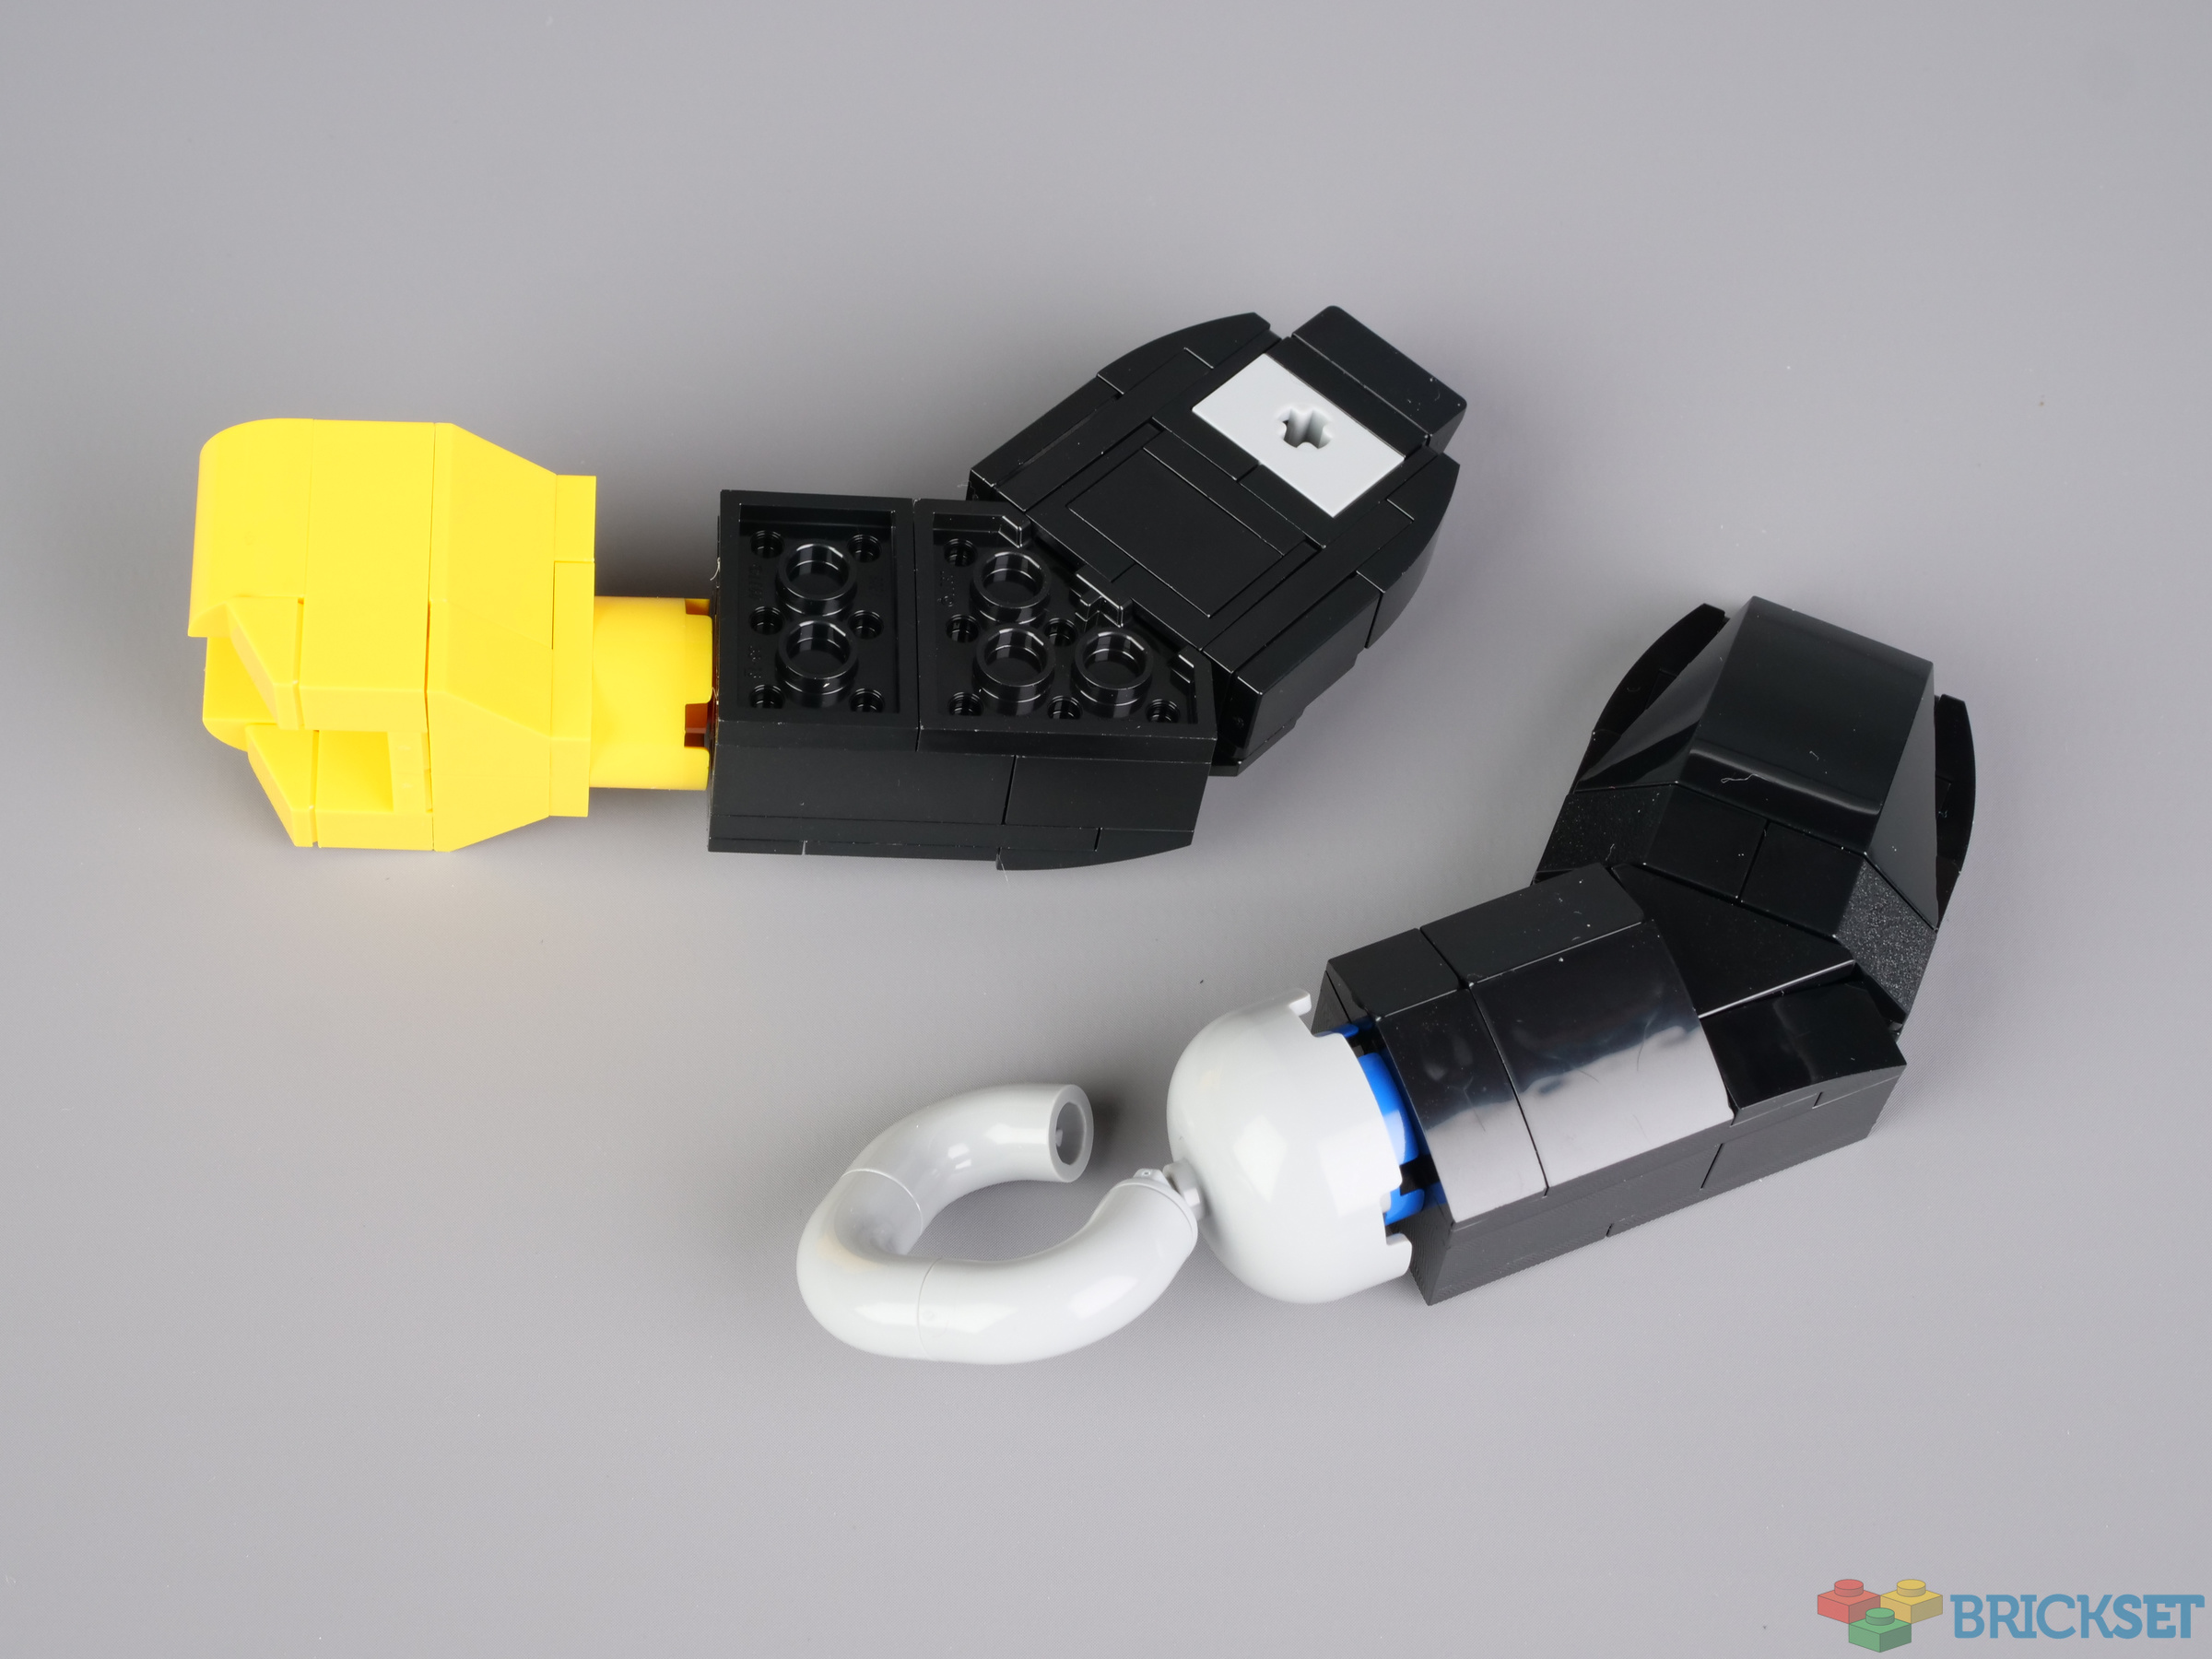 LEGO 40504 A Minifigure Tribute review